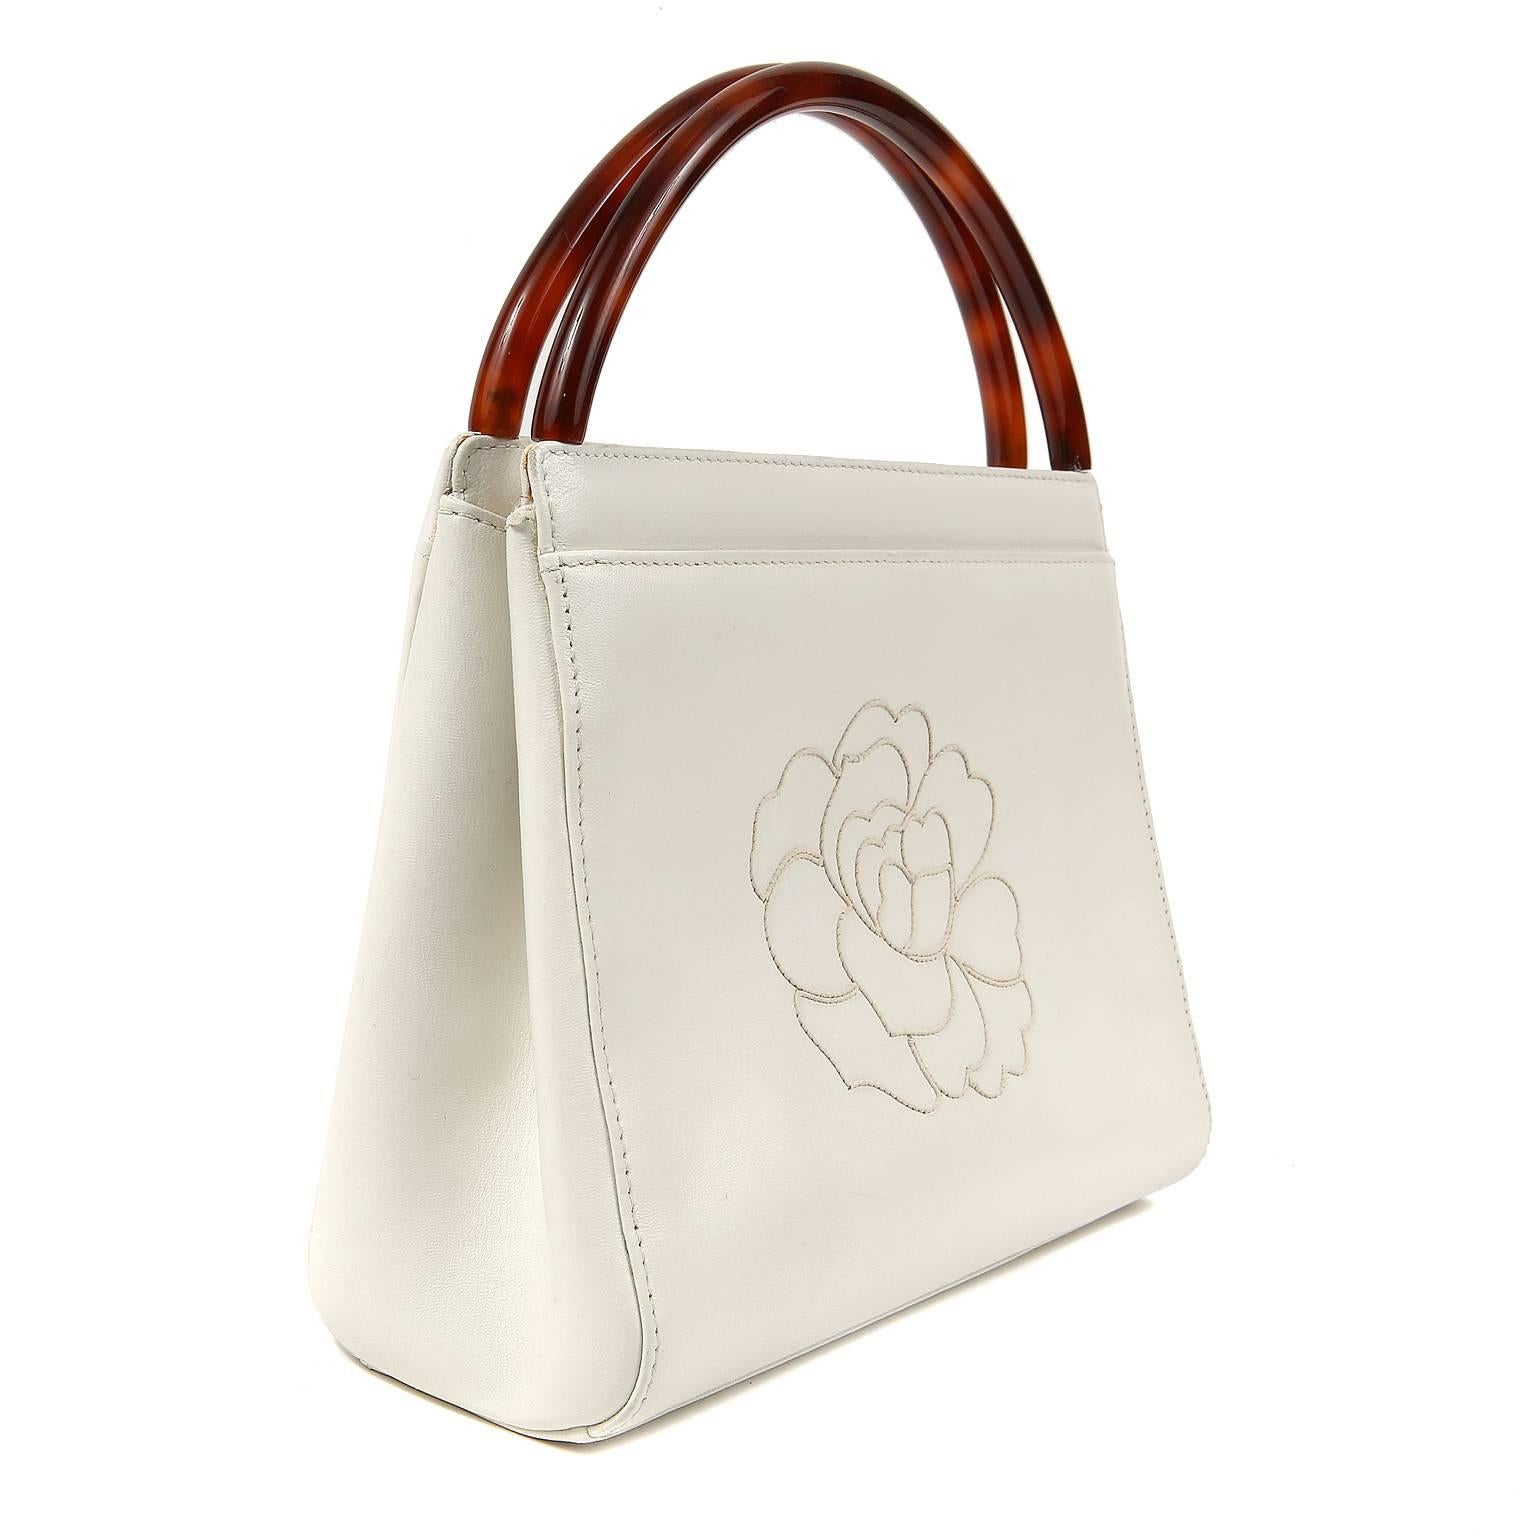 Chanel Vintage White Leather Camellia Day Bag- EXCELLENT
 The rounded Bakelite handles add interest to this unique and collectible bag.

Snowy white leather has the iconic camellia flower stitched on the front.  A magnetic snap accesses the white